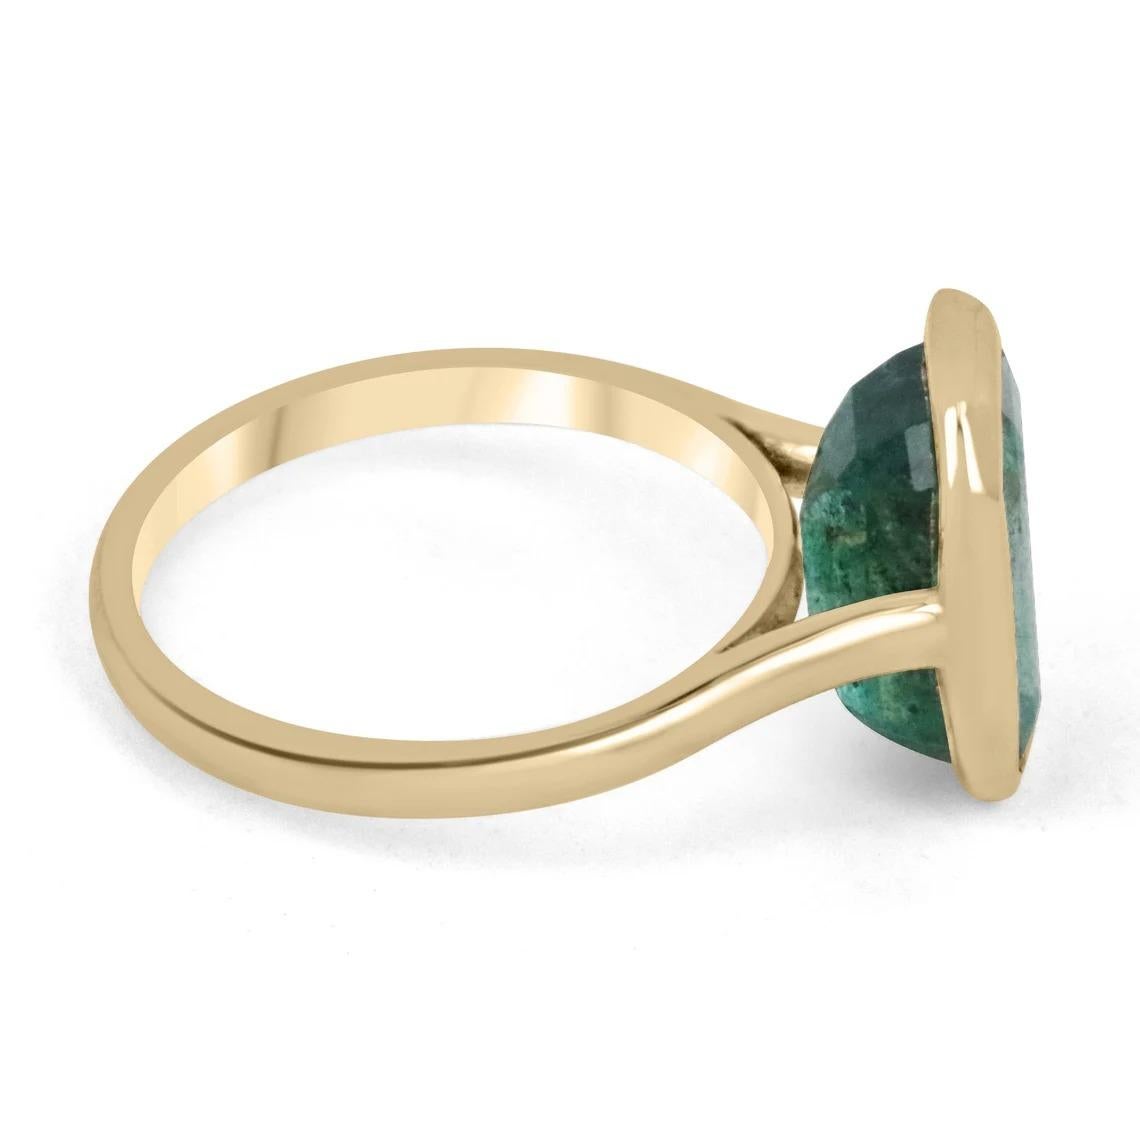 Displayed is a stunning emerald solitaire engagement or right-hand ring in 14K yellow gold. This gorgeous solitaire ring carries a 4.76-carat emerald in a bezel setting. Fully faceted, this gemstone showcases excellent shine and beautiful, dark